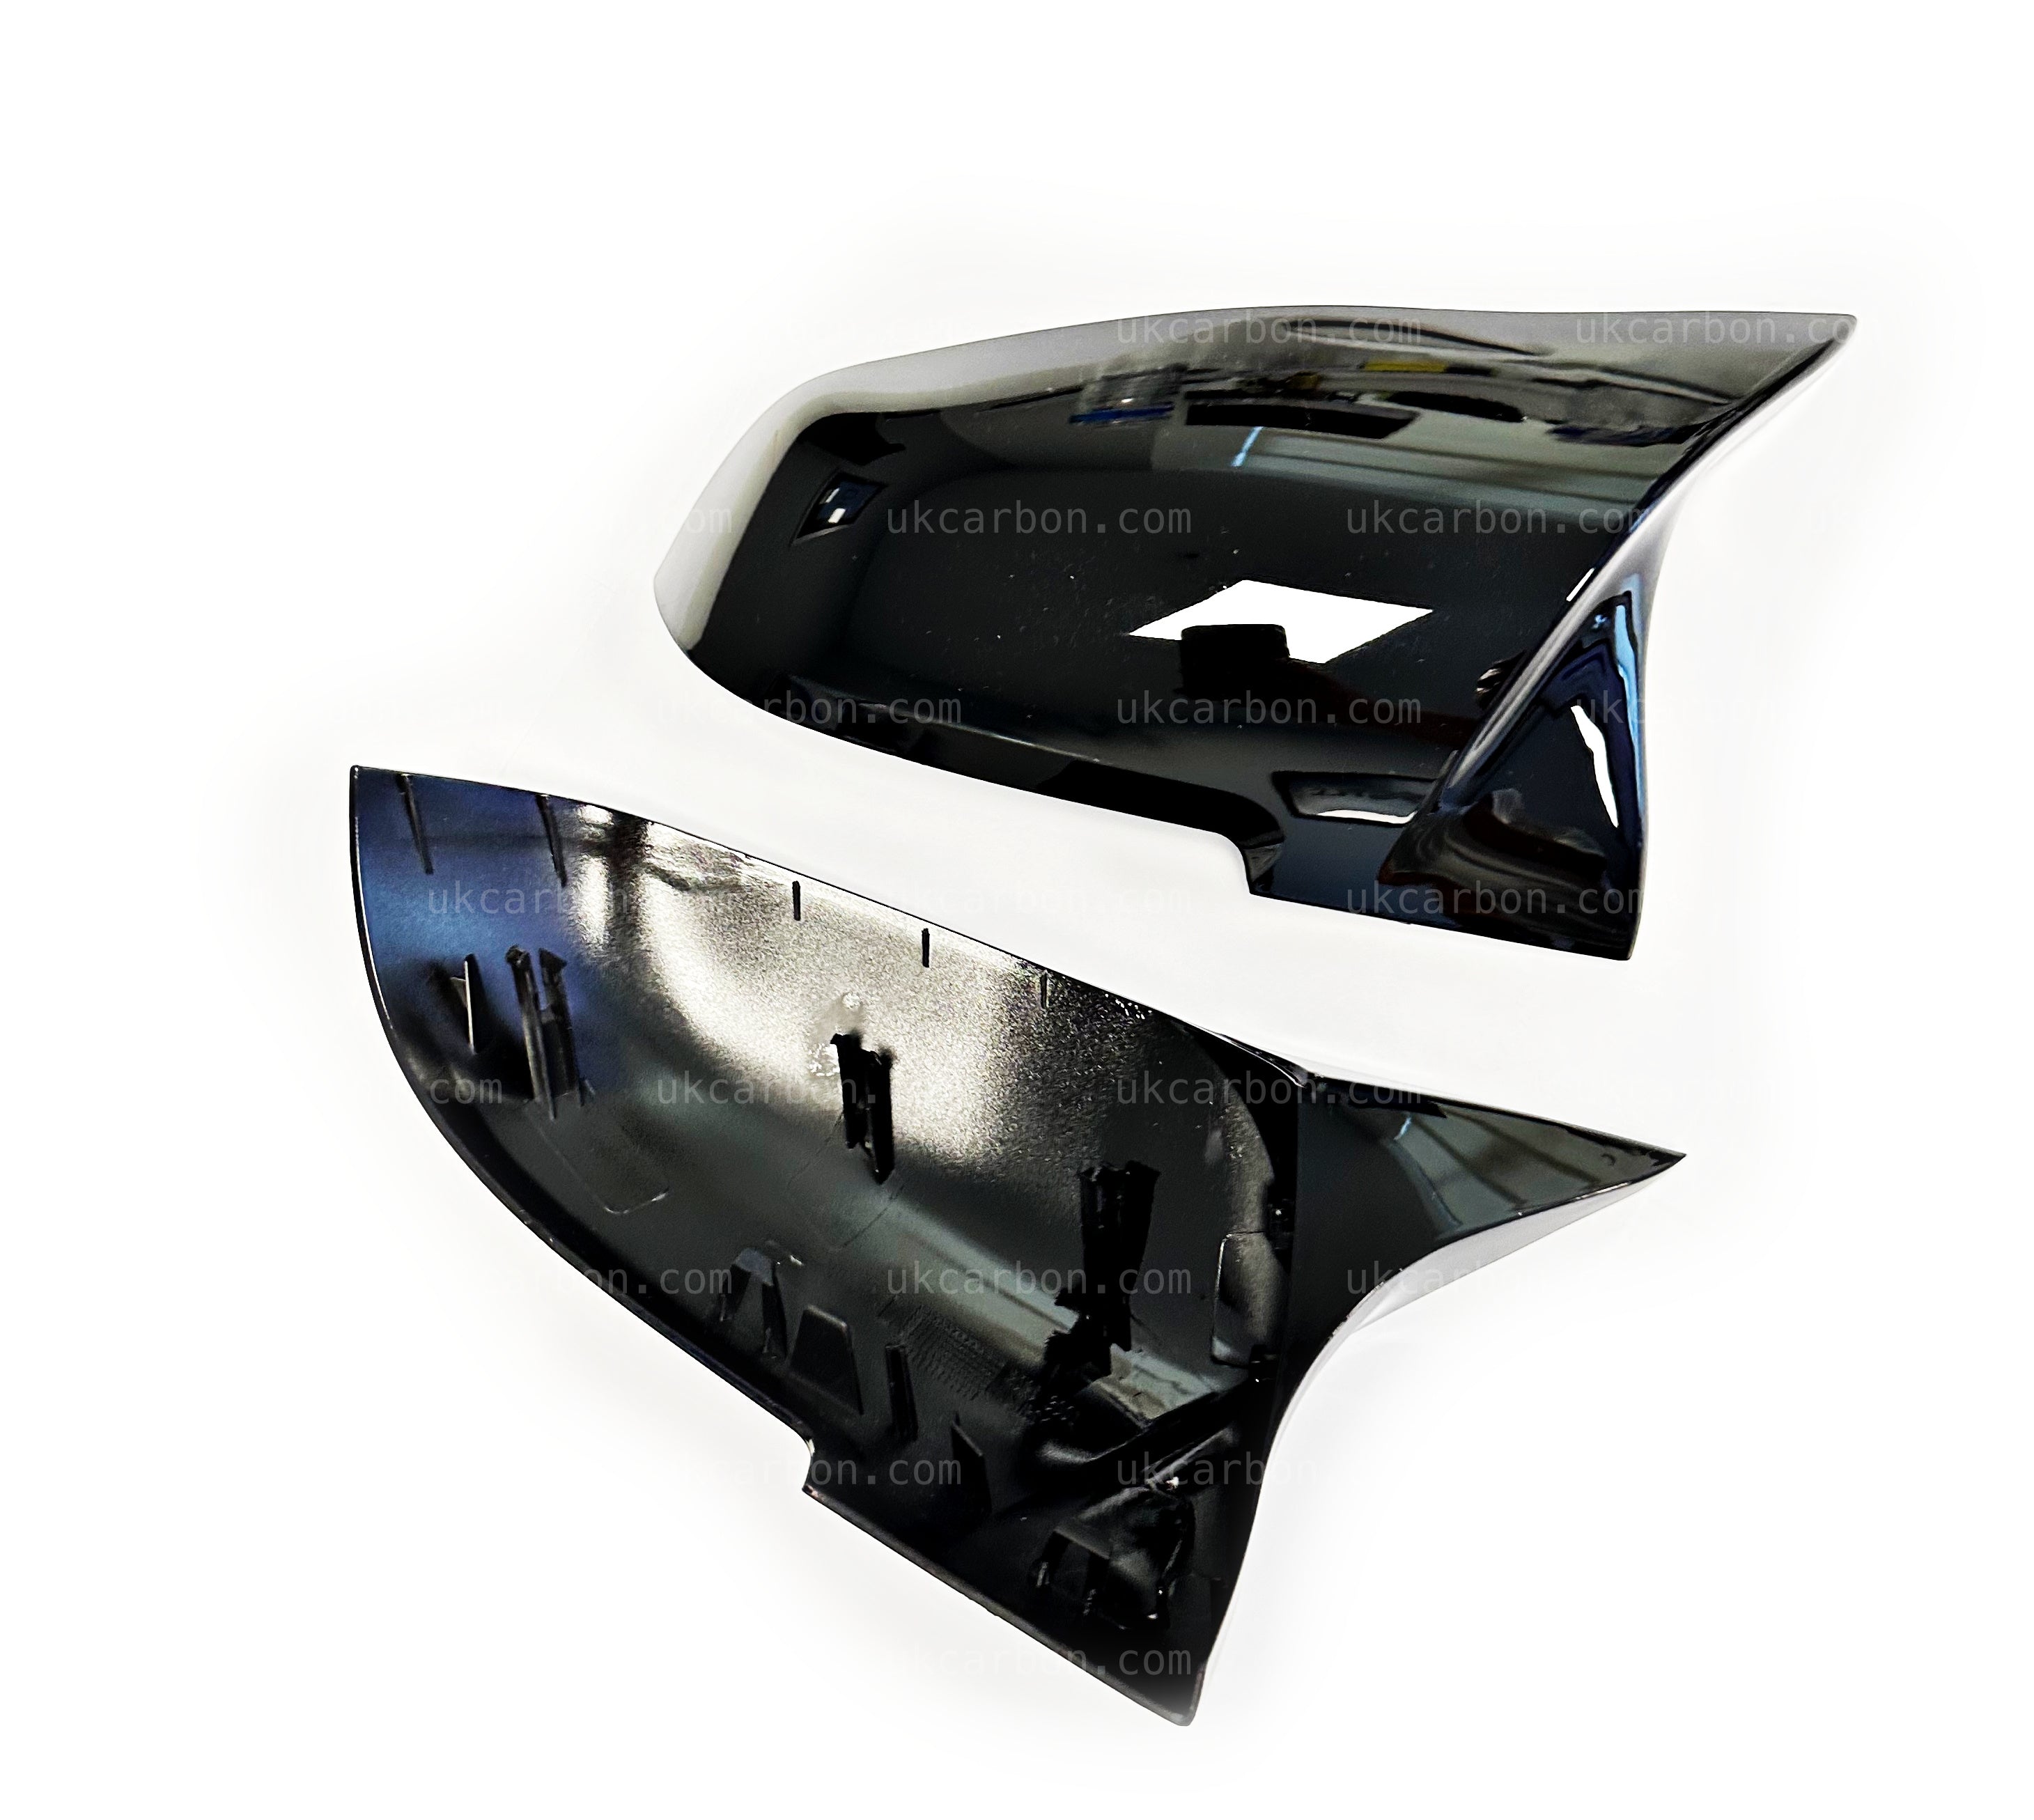 BMW 2 Series Gloss Black M Style Wing Mirror Cover Replacements F22 by UKCarbon